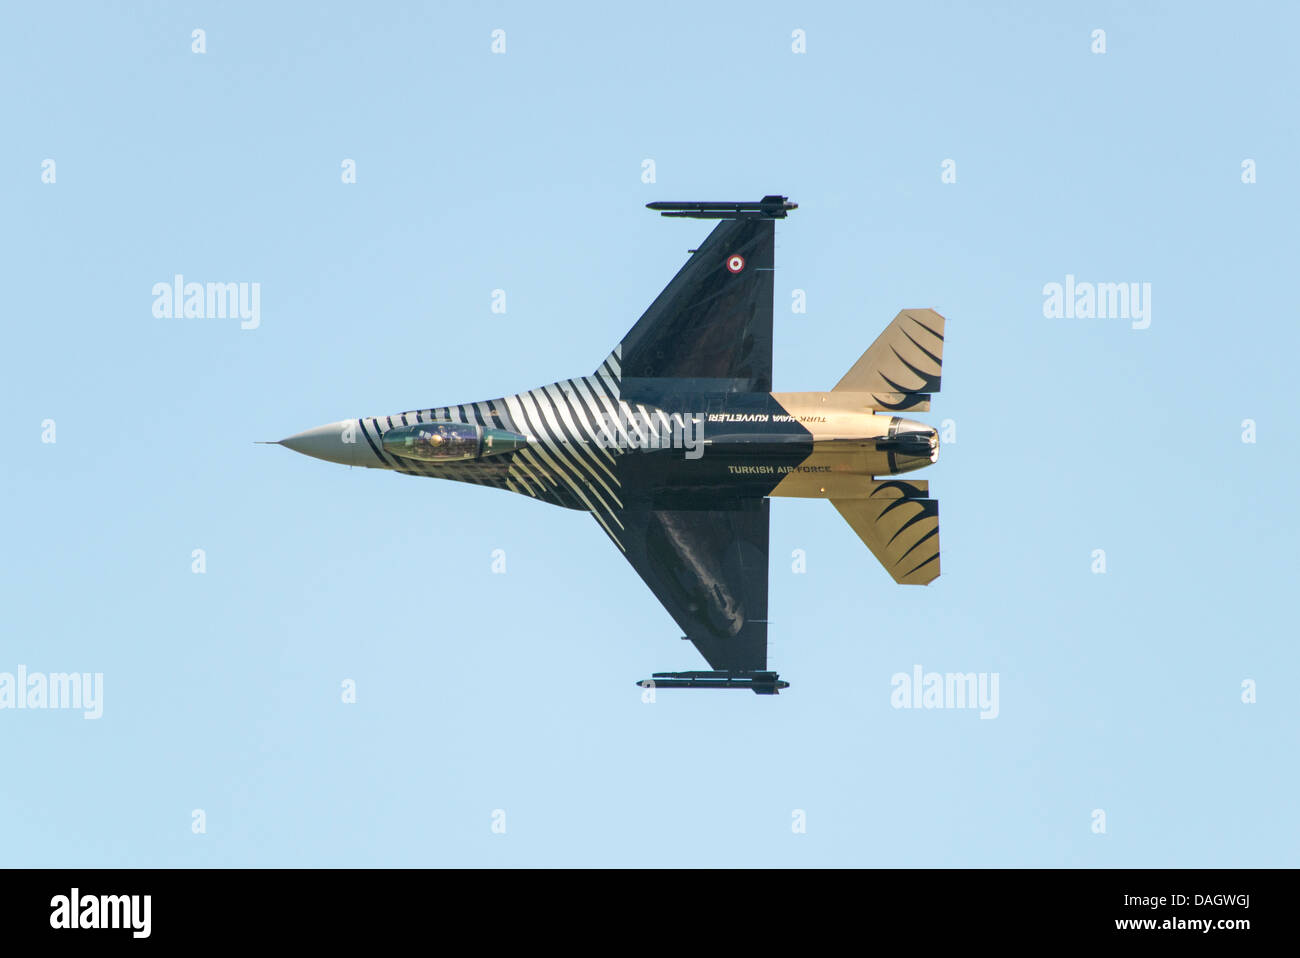 Turkish Air Force Solo Demonstration F-16 Fighter jet displays at the 2013 RAF Waddington Air Show. Stock Photo